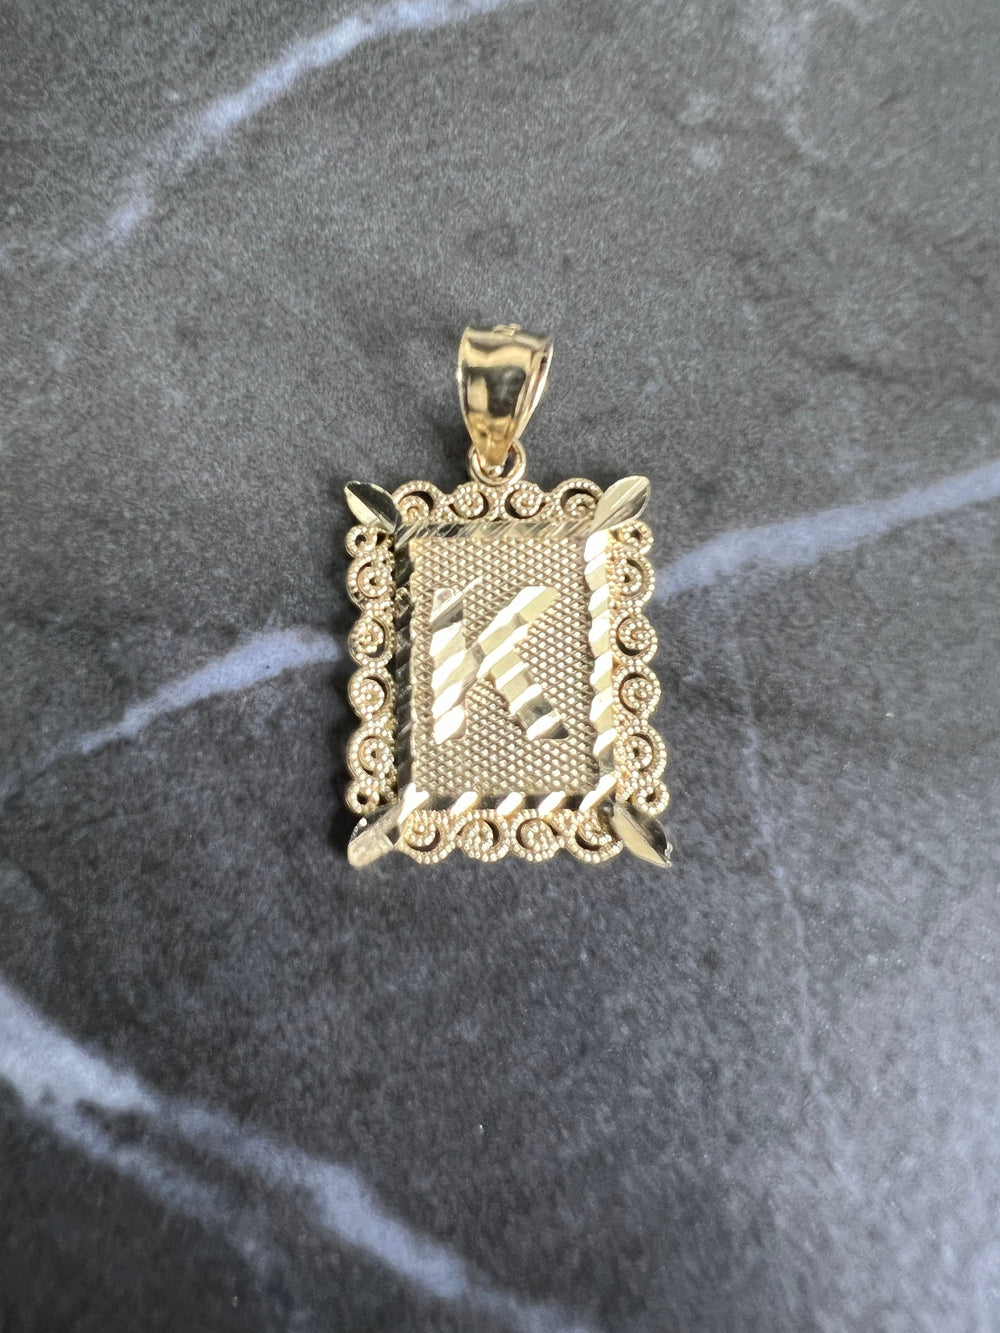 Authentic 10K Gold Medal Initial Letter Charm/Pendant